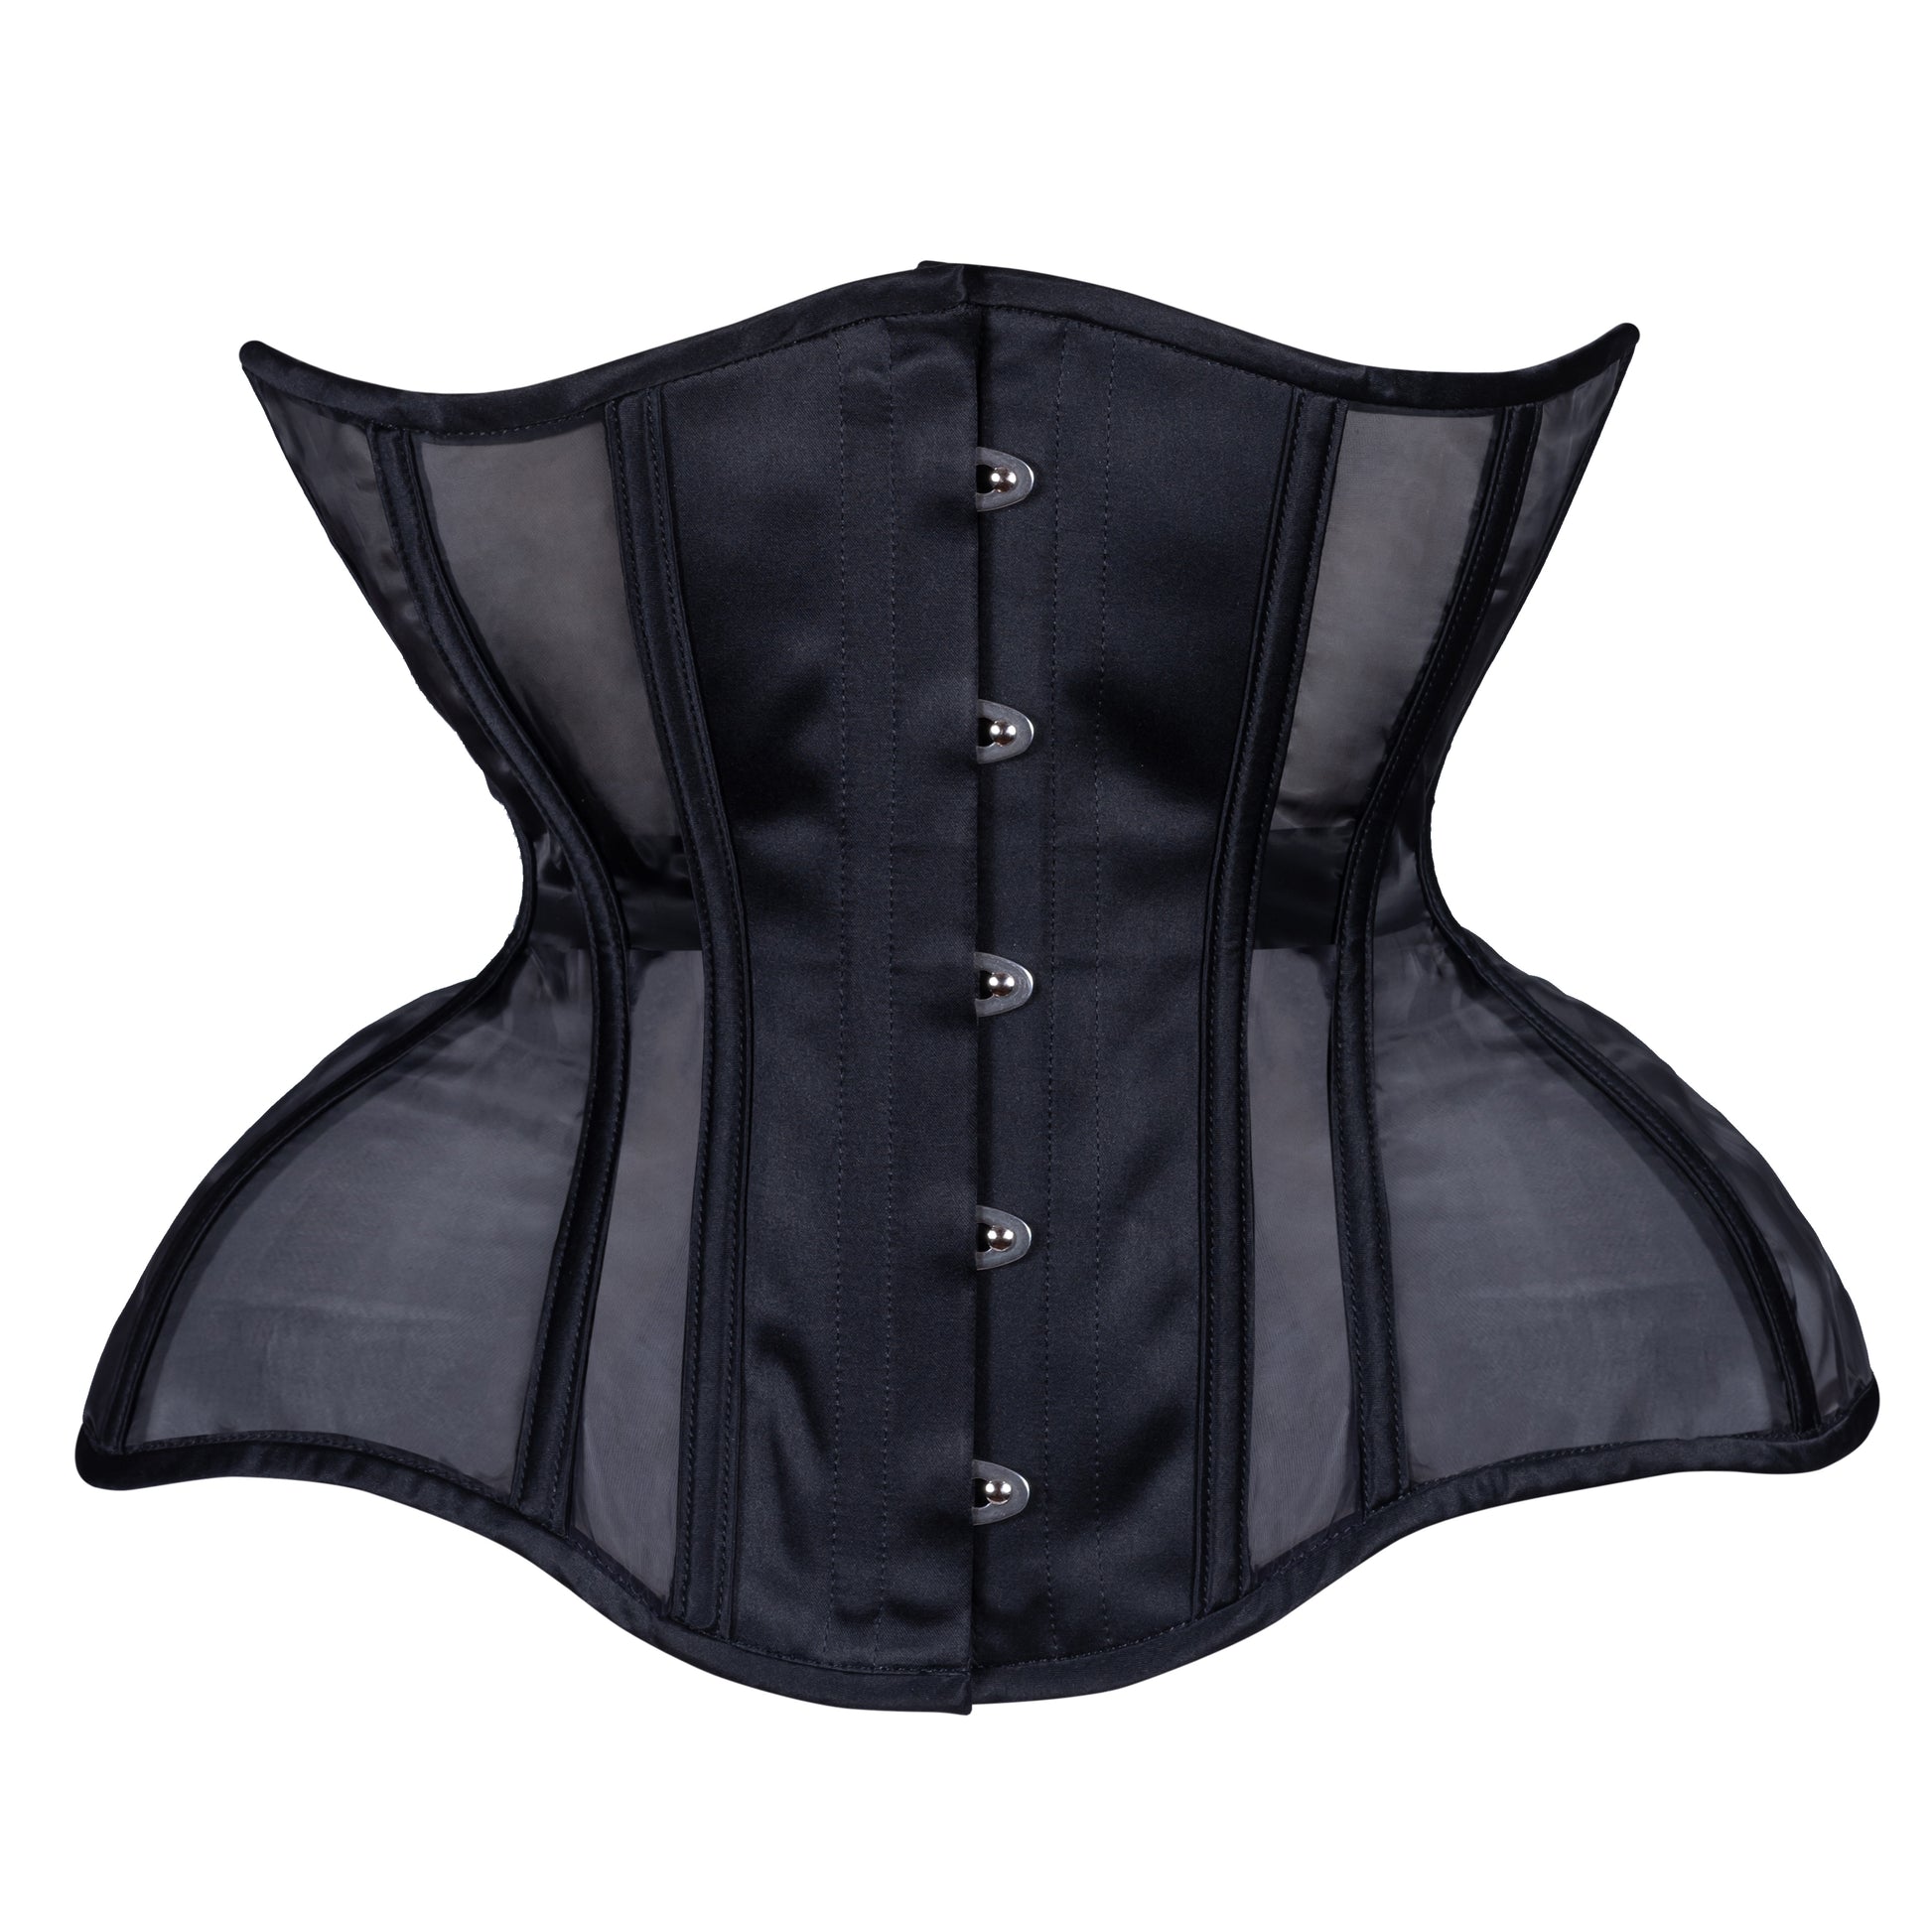 What to Look for in the Perfect “Stealthing” Corset (Hiding